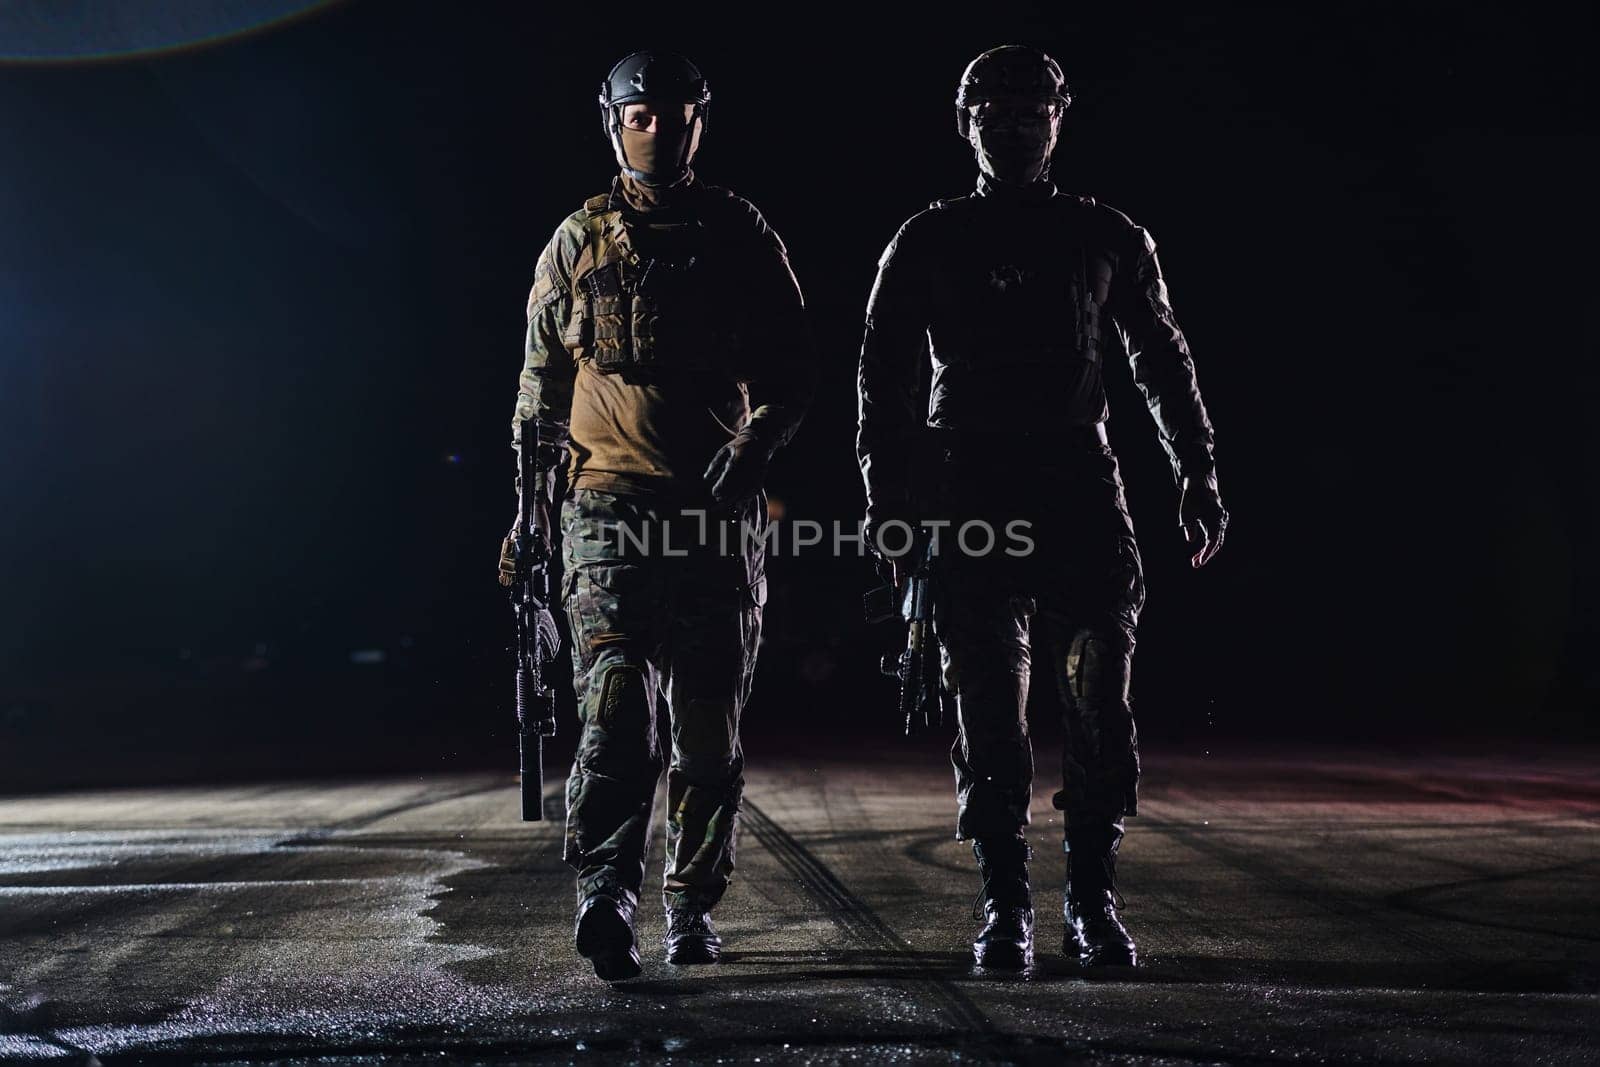 Two professional soldiers marching through the dark of night on a dangerous mission, epitomizing their unwavering bravery, unwavering teamwork, and the high-stakes intensity of their specialized training as they prepare to confront unknown perils in the name of duty and sacrifice